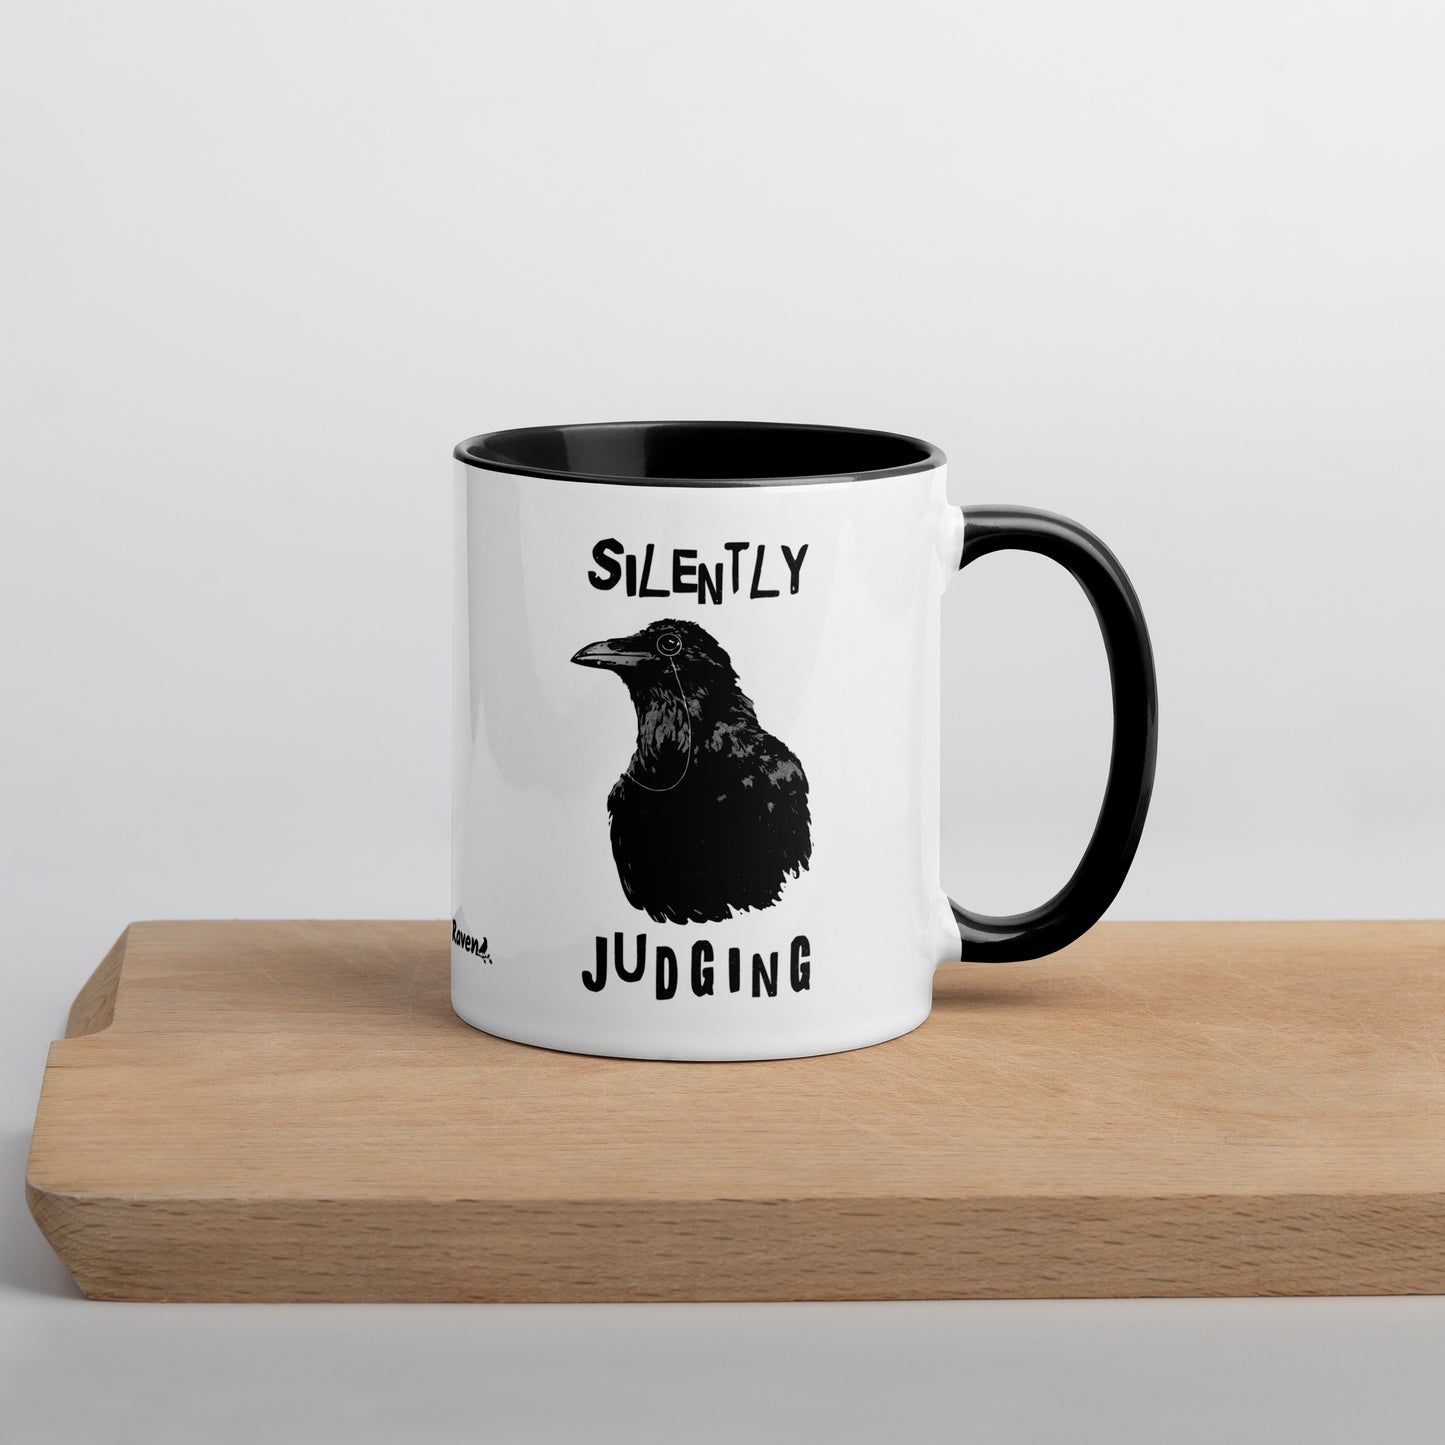 11 ounce ceramic mug with Silently Judging text surrounding a monacle-wearing crow. Double-sided design. Mug has black rim, handle, and inside. Shown sitting on wooden cutting board with handle facing right.